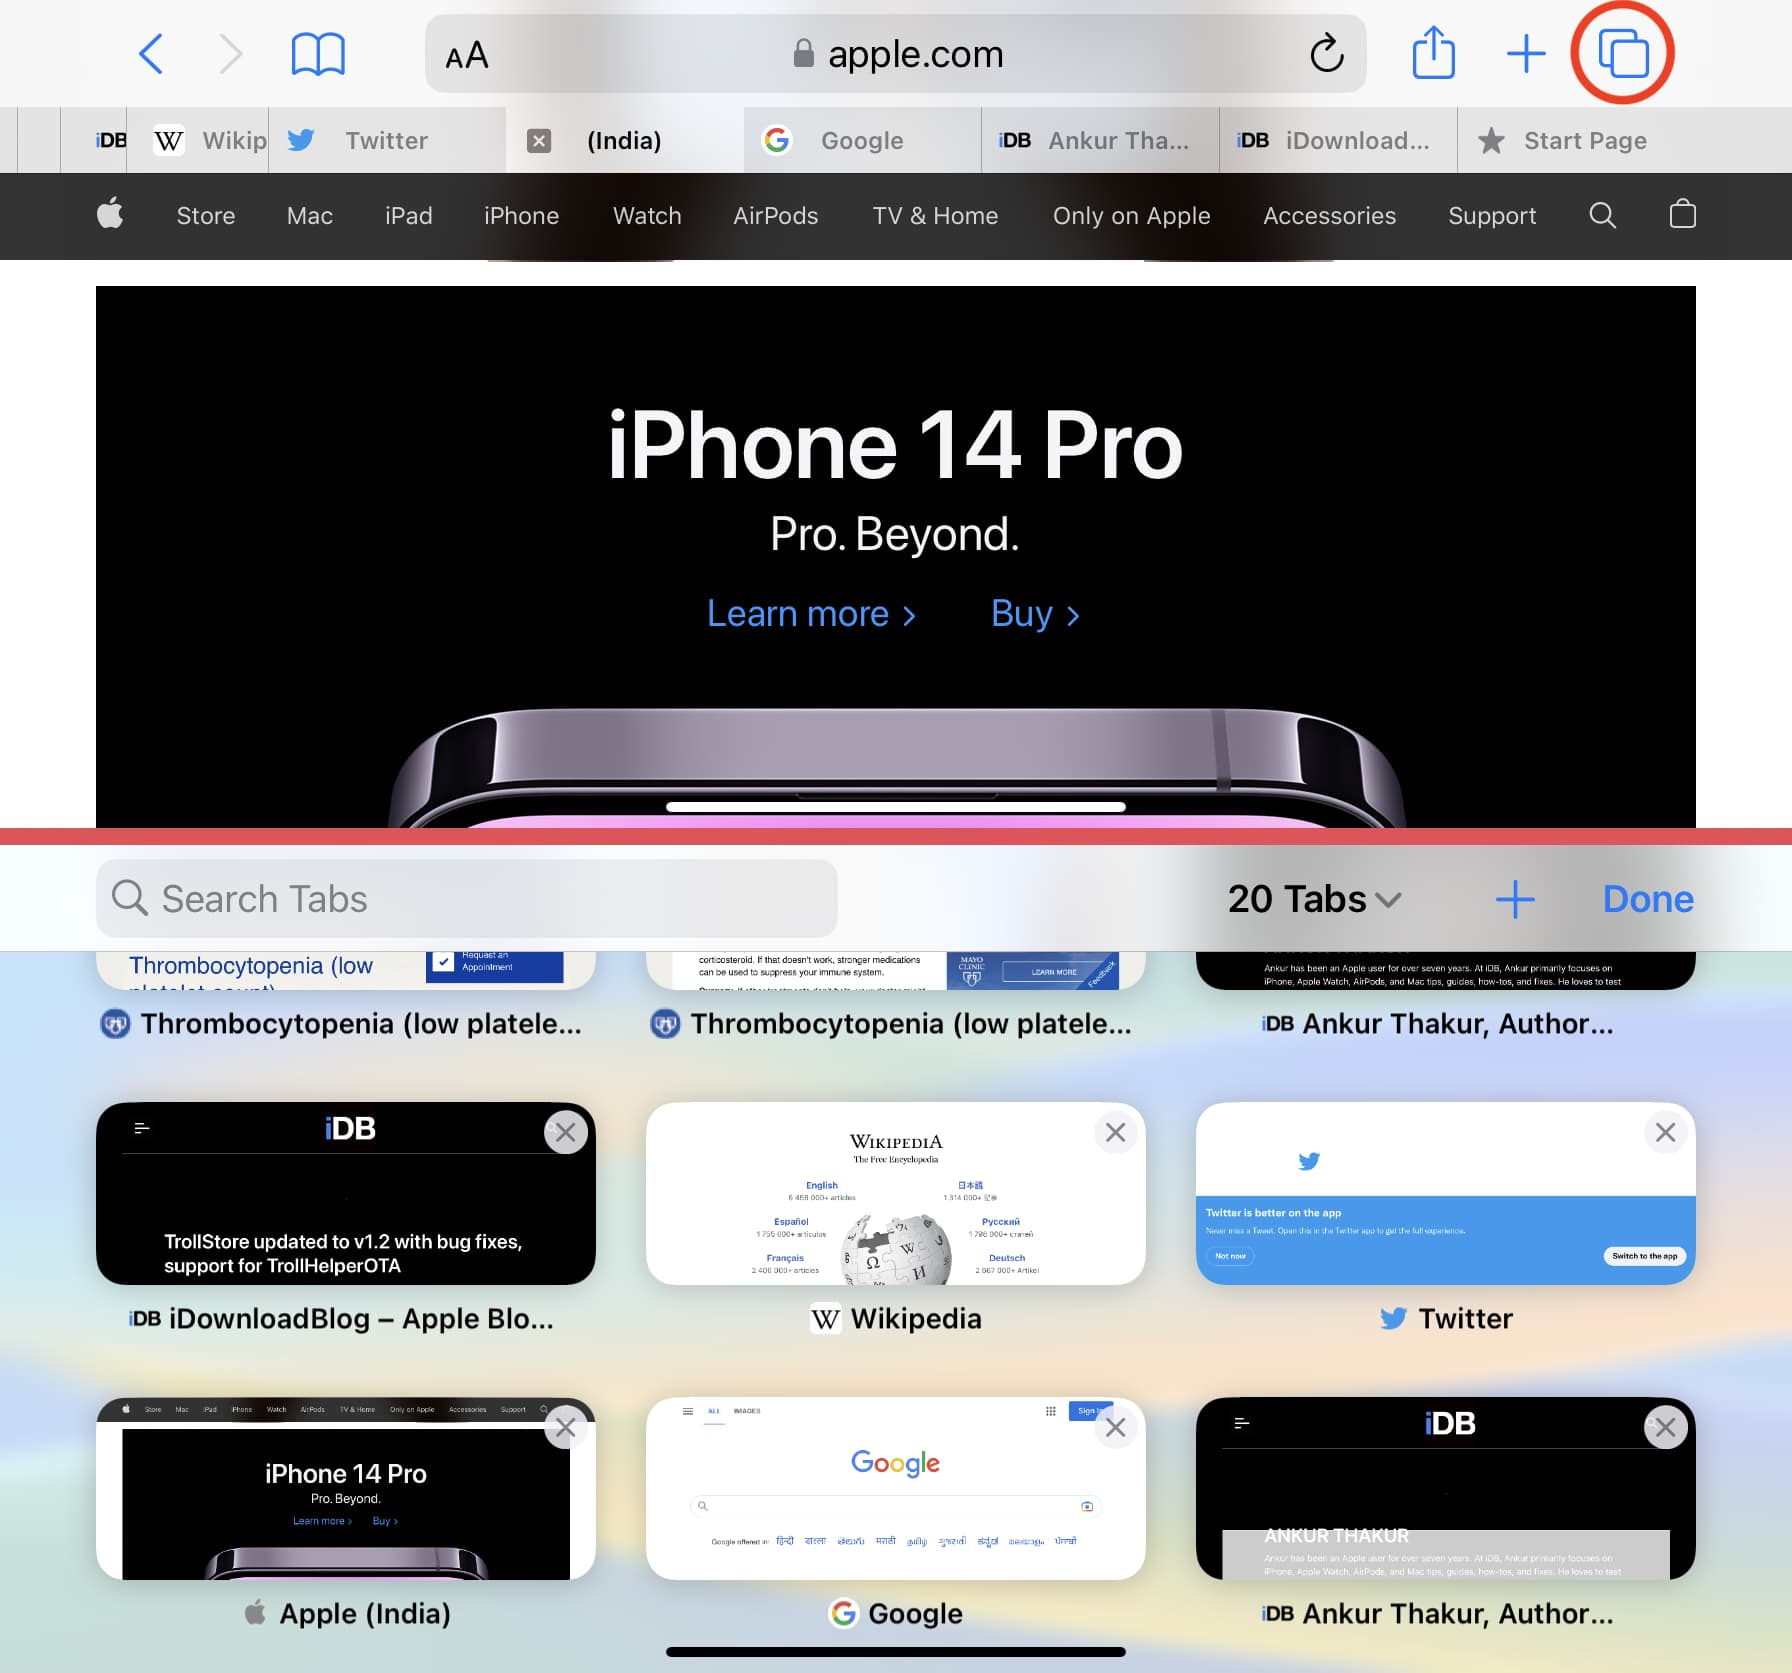 See all open Safari tabs in landscape mode on iPhone